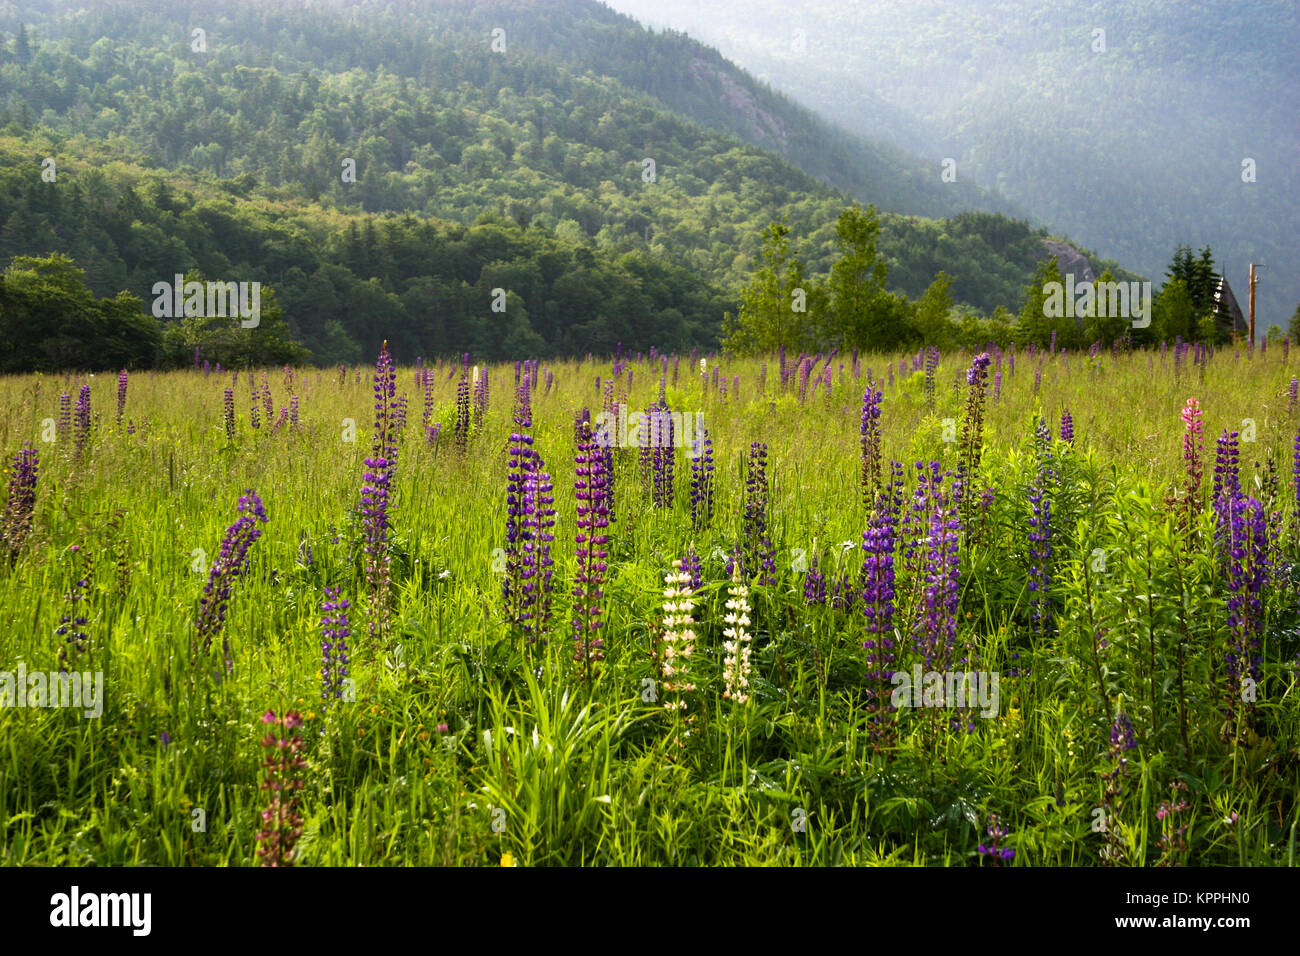 Lupin fleurs dans une prairie au White Mountains National Forest, New Hampshire, USA. Banque D'Images